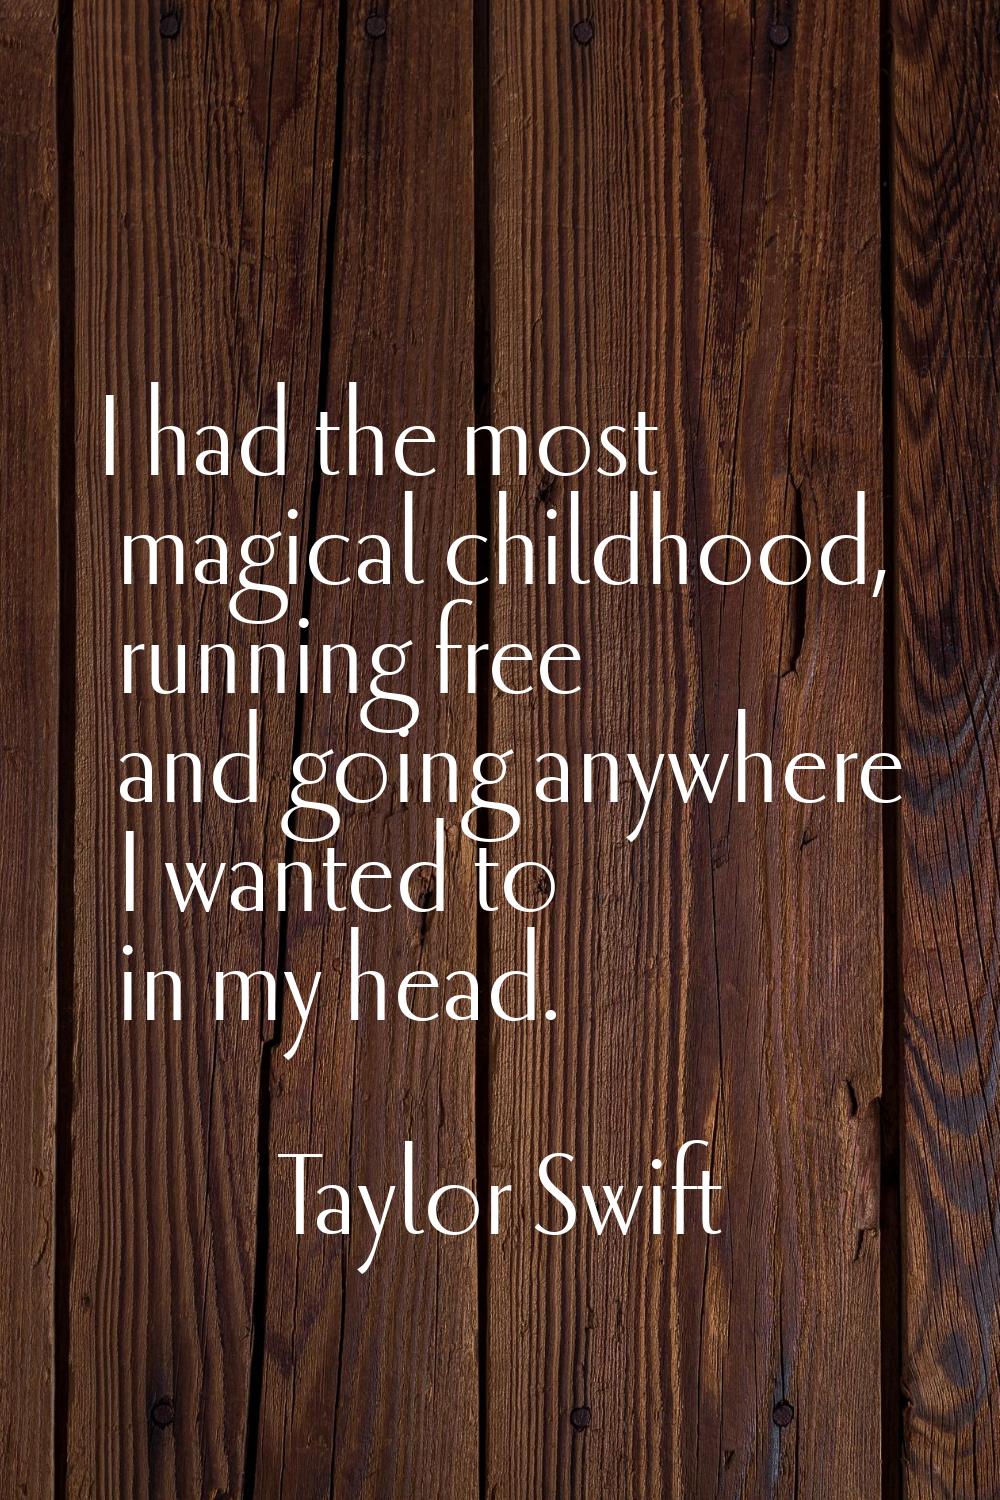 I had the most magical childhood, running free and going anywhere I wanted to in my head.